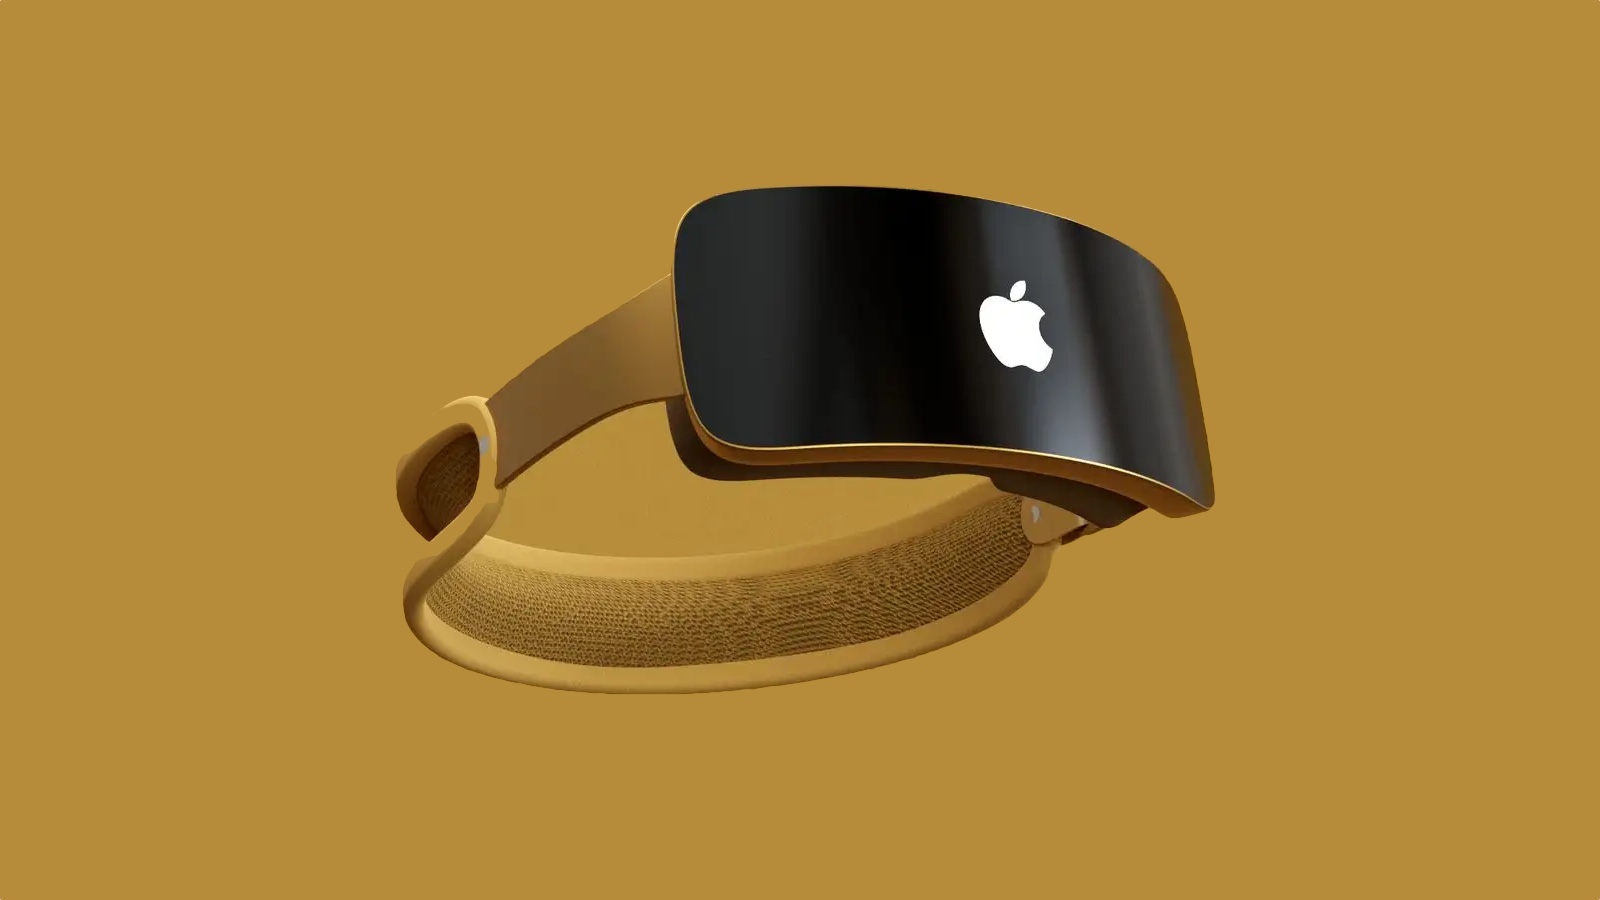 Apple Reality Pro concept in yellow